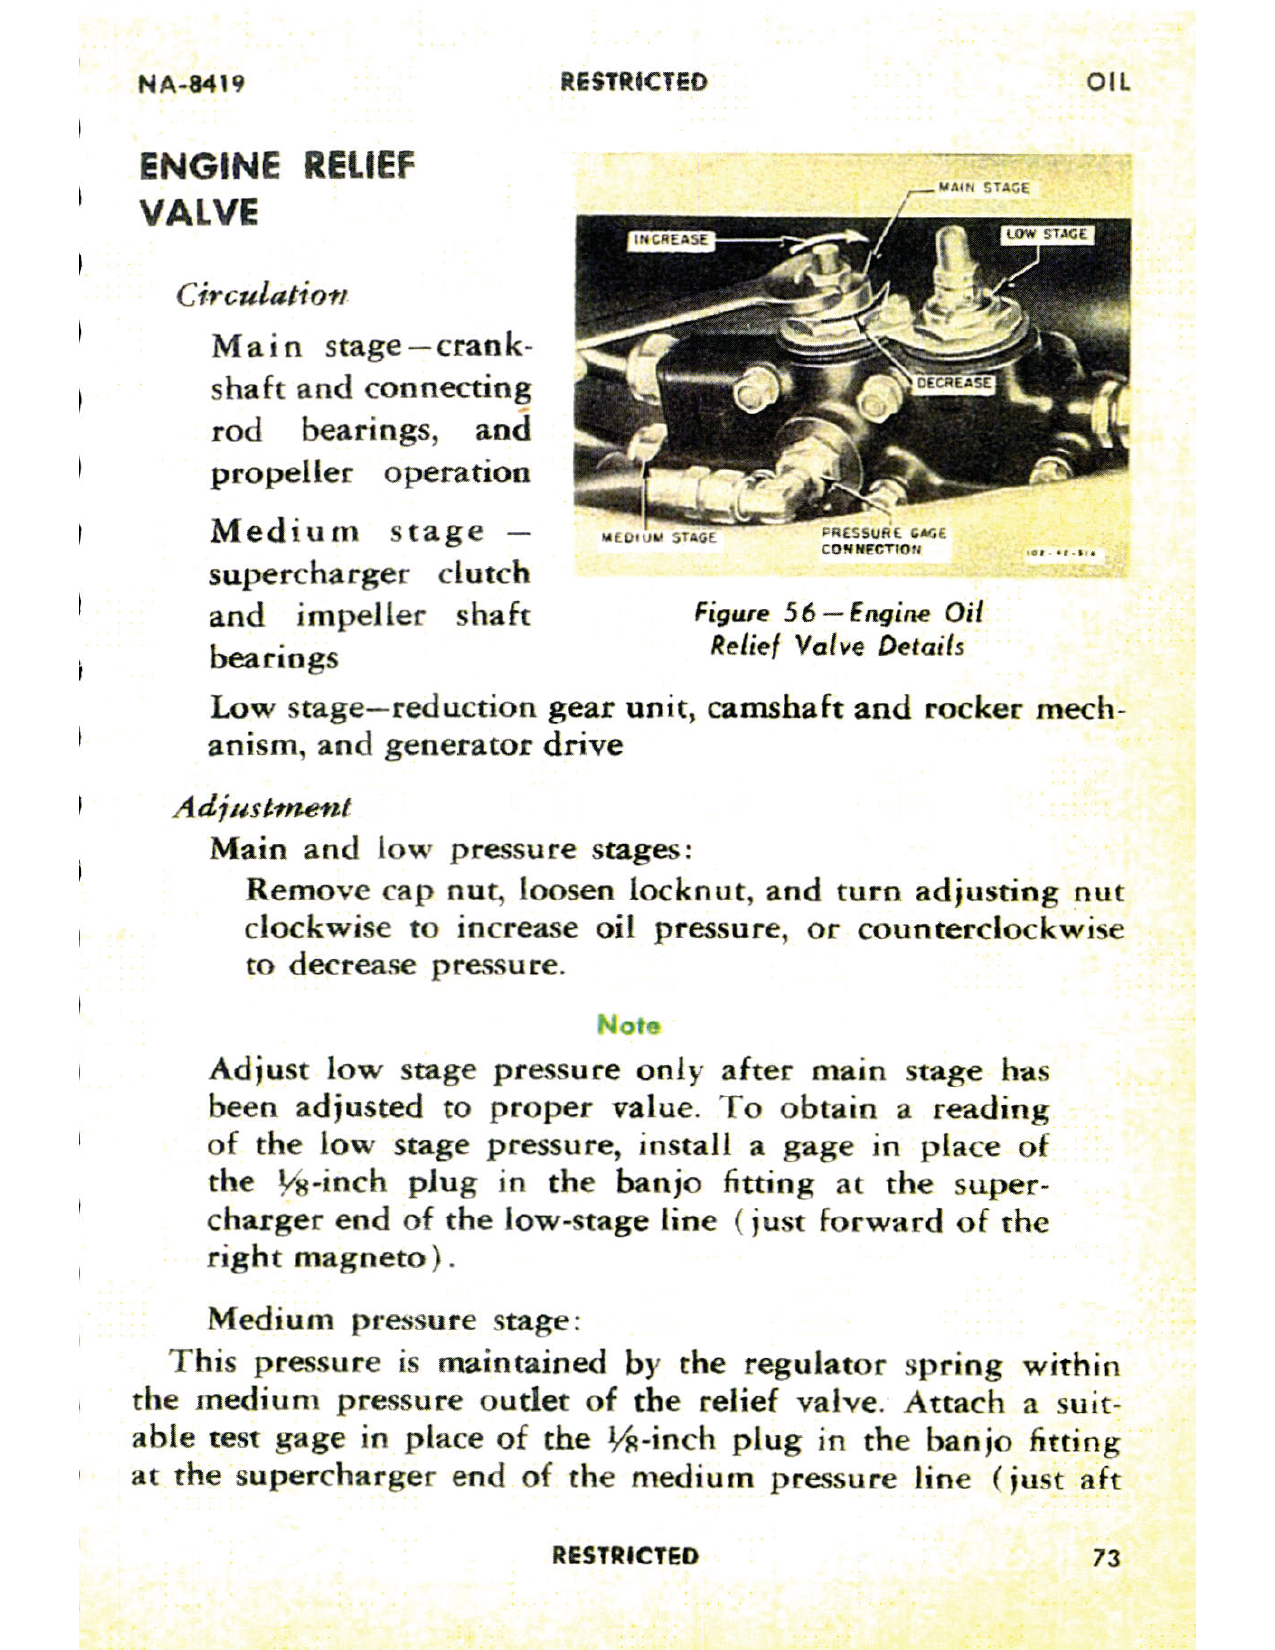 Sample page 73 from AirCorps Library document: Reference Manual P-51D P-51K